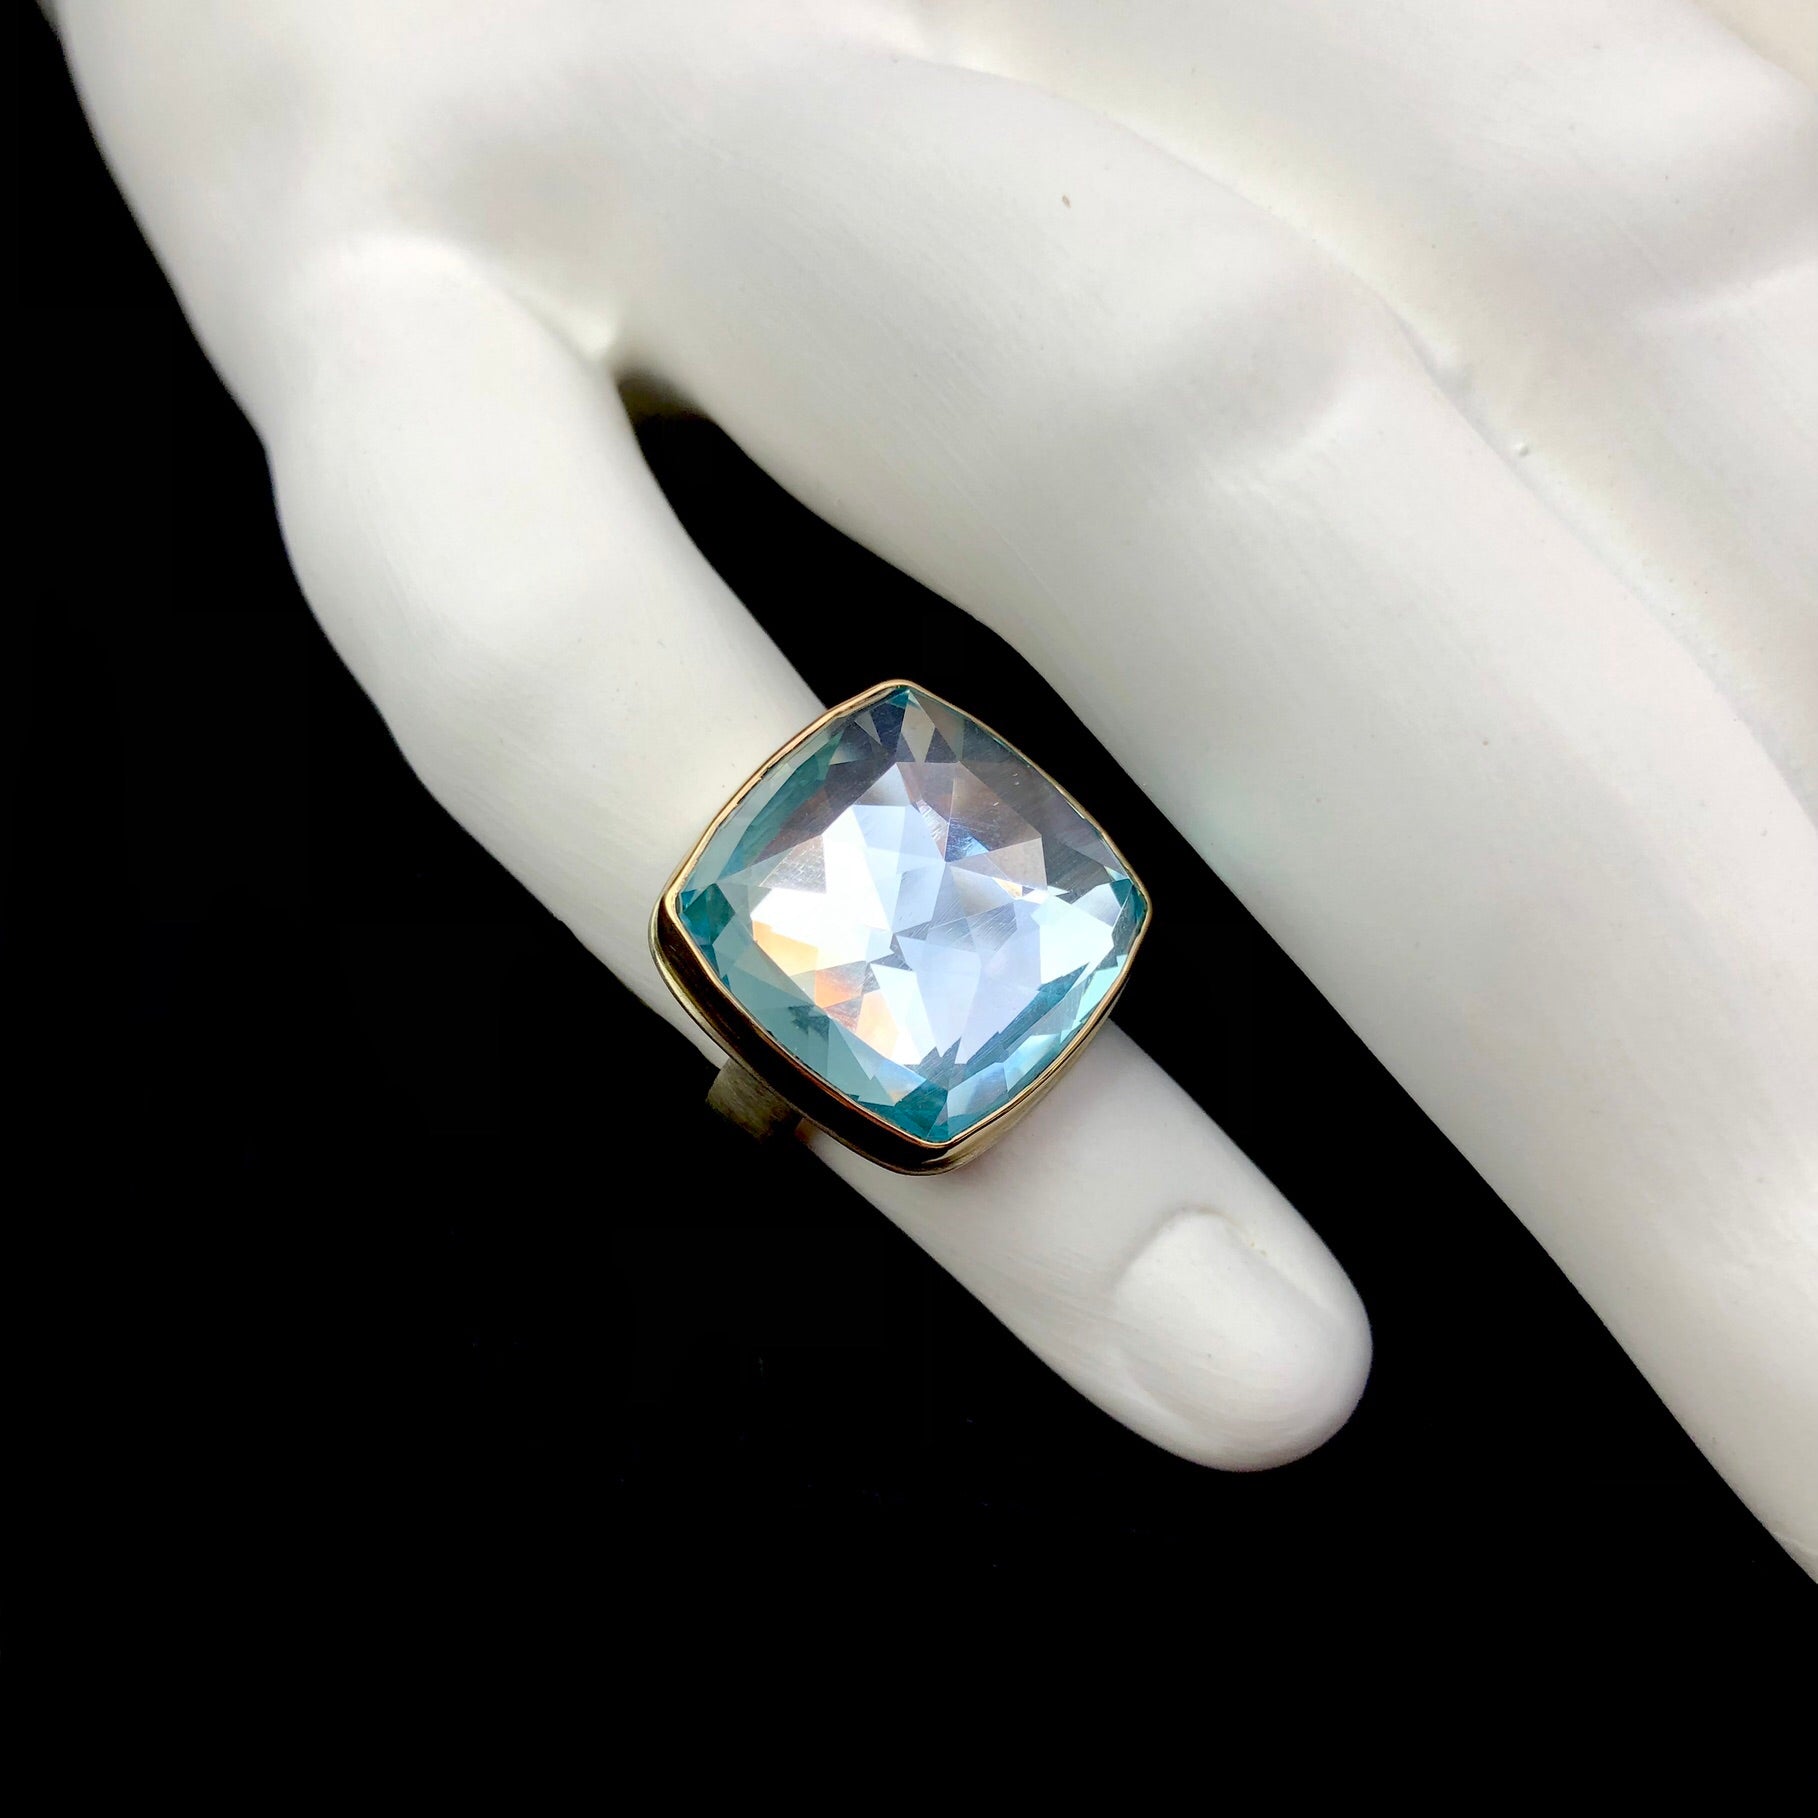 Top view of Square shaped Sky Blue Topaz ring with light captured inside shown on white ceramic finger